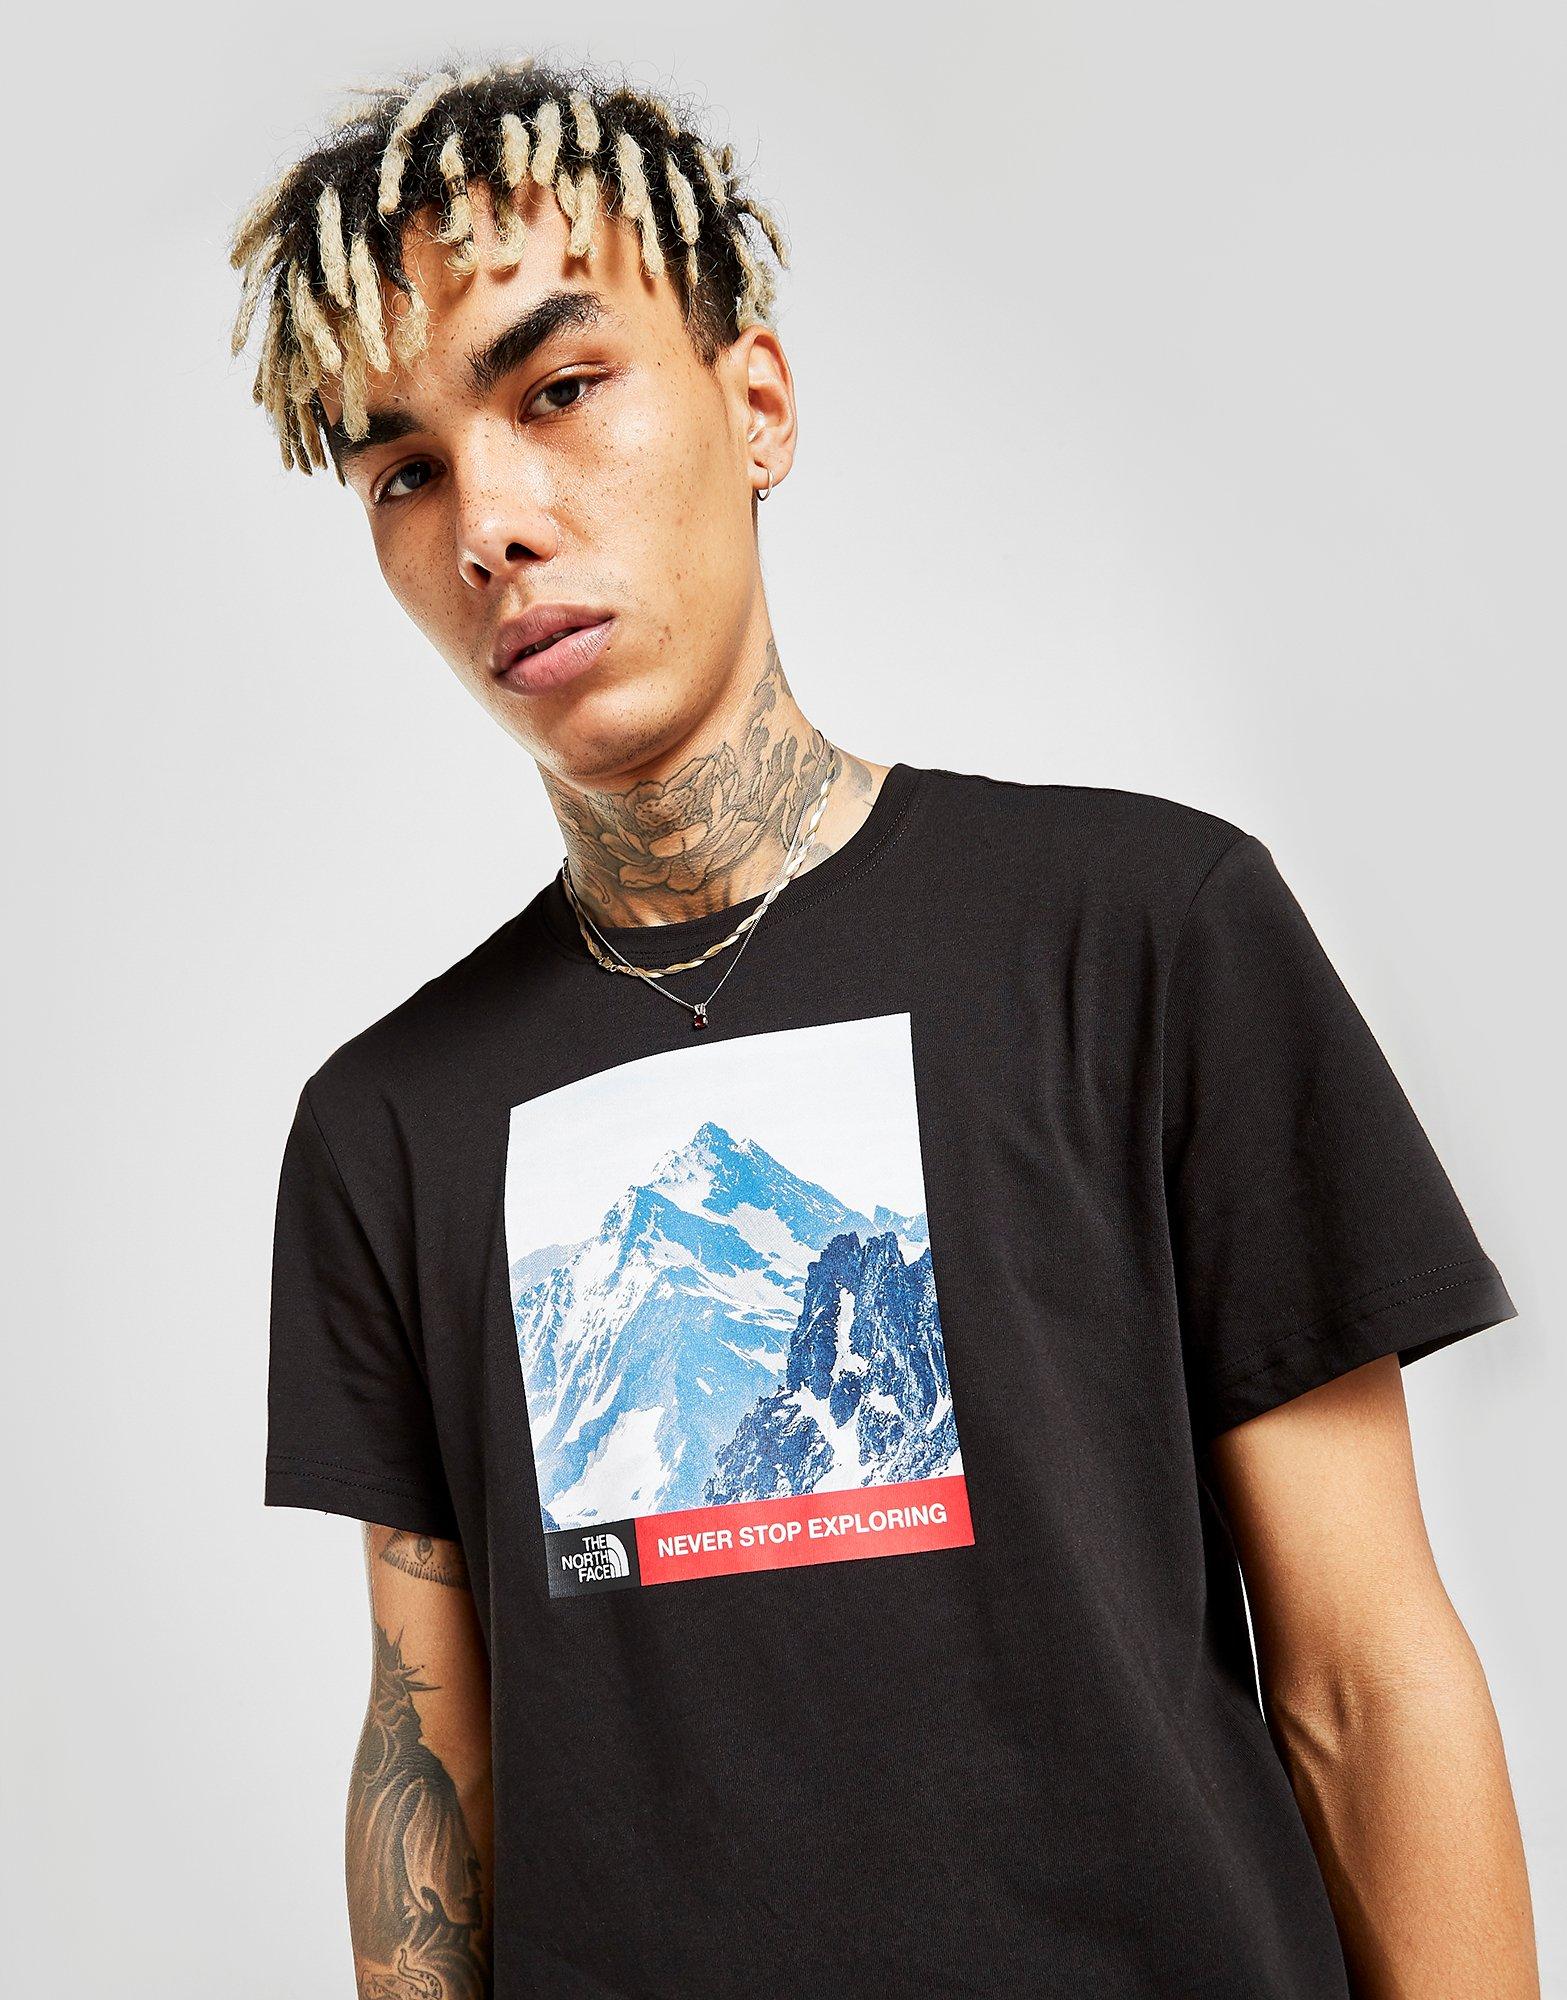 north face mountain t shirt